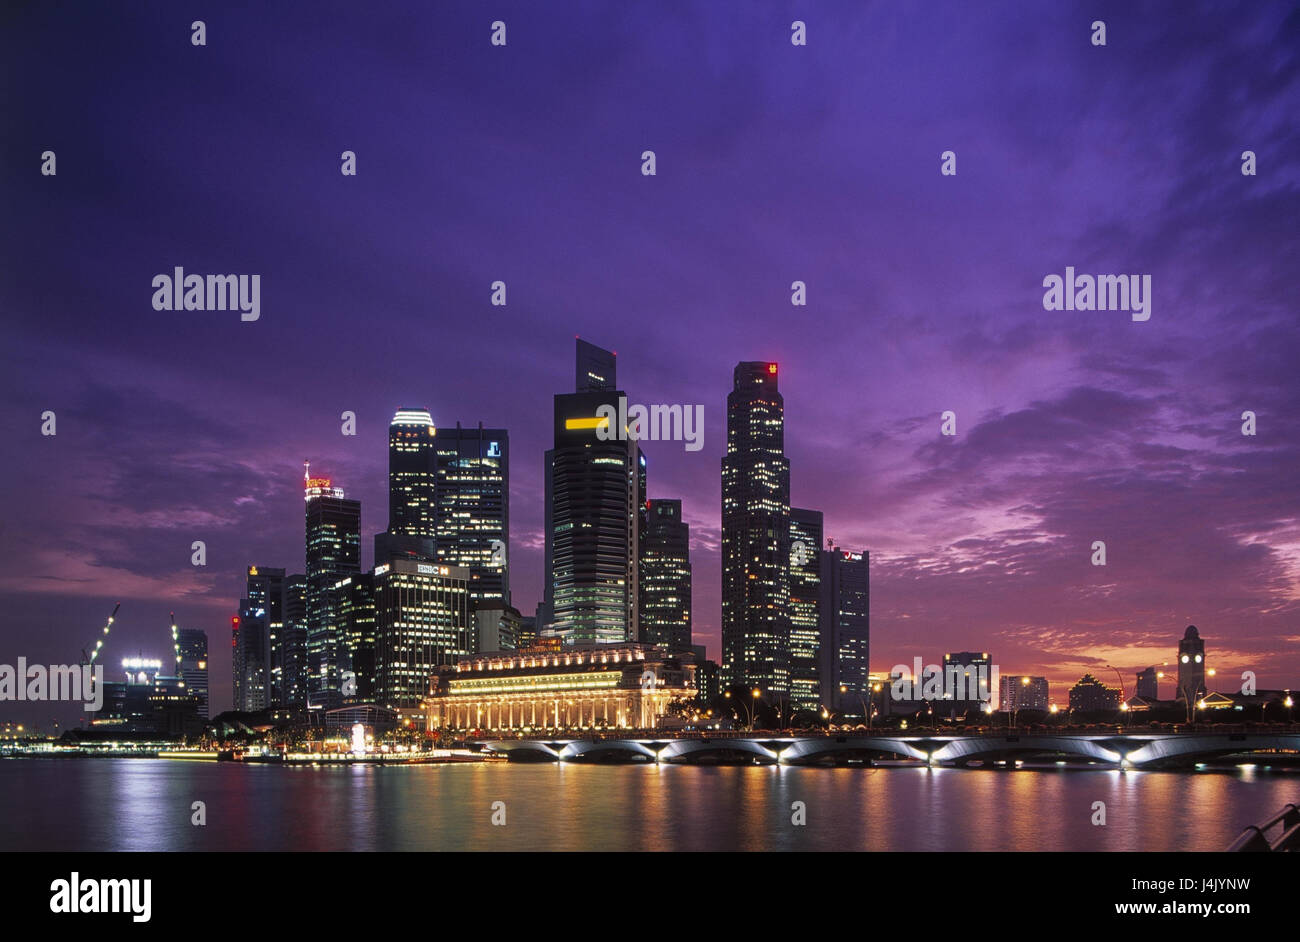 Singapore, Singapore town, skyline, evening mood South-East Asia, Republic of Singapore, city state, town view, city, high rises, skyscrapers, view, evening, afterglow Stock Photo